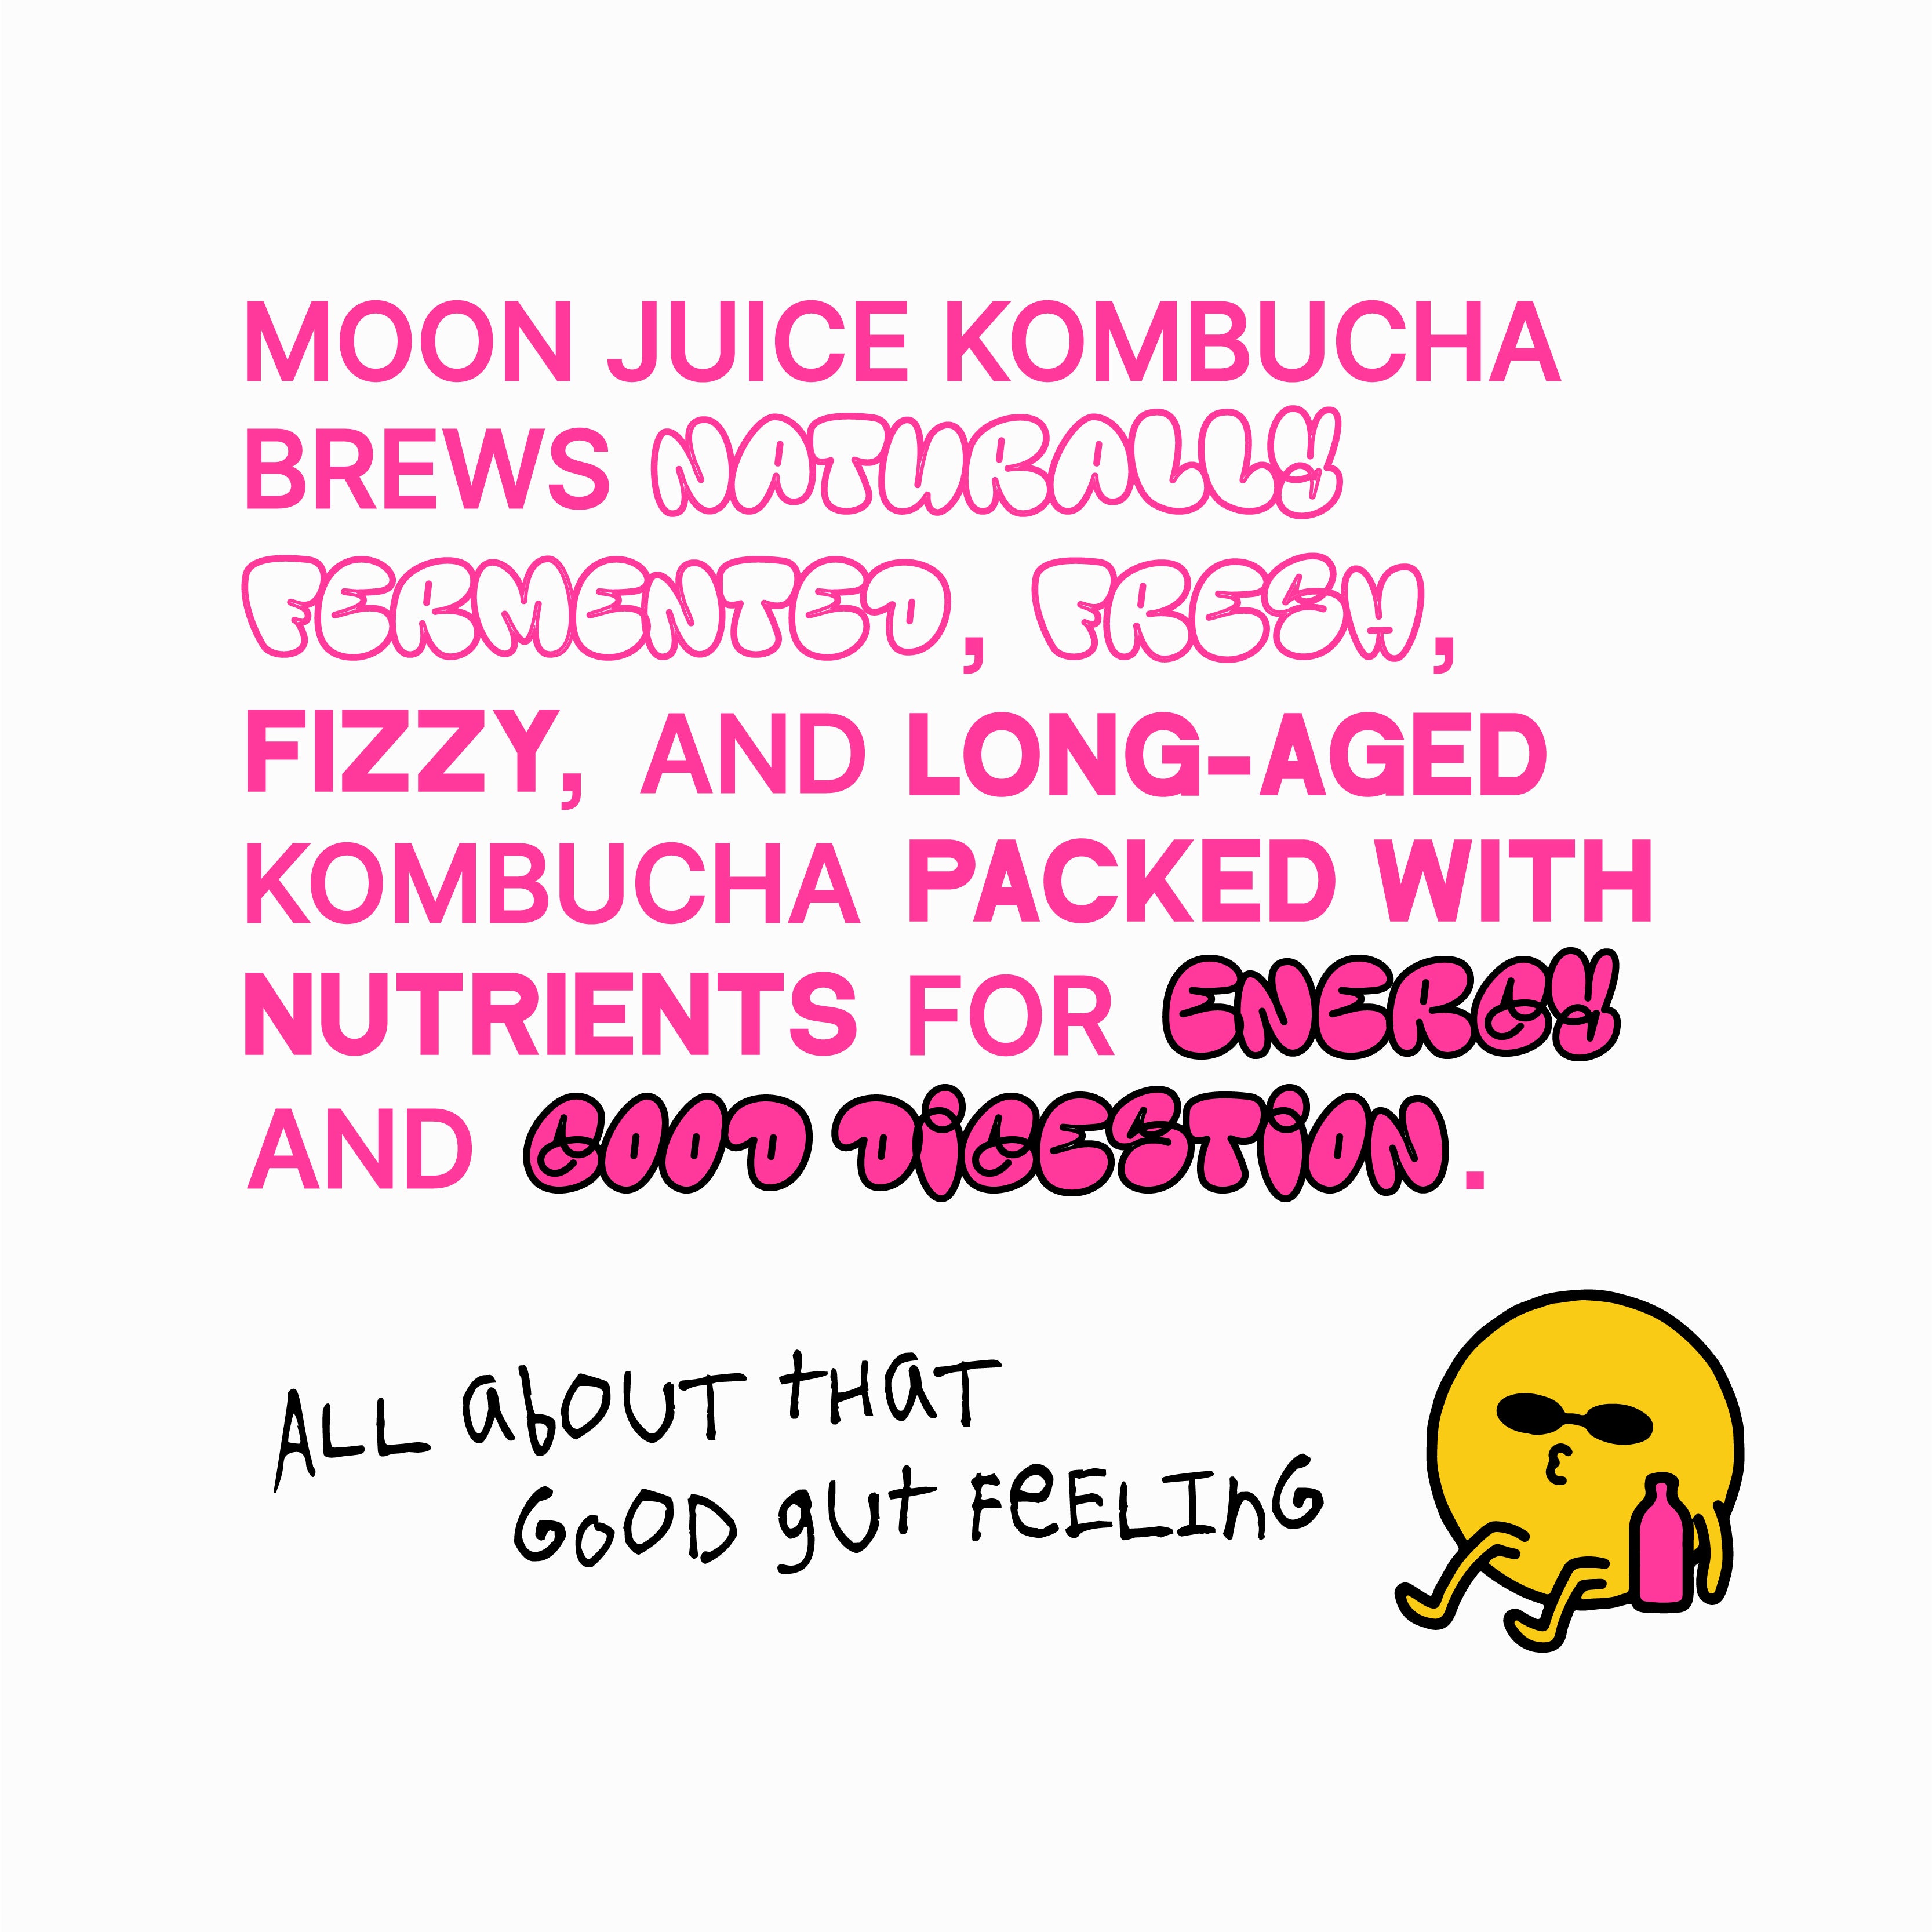 Moon Juice Kombucha brews naturally fermented, fresh, fizzy and long-aged Kombucha packed with nutrients for energy and good digestion. All about that good gut feeling. Image of Moon Guy with Sunglasses